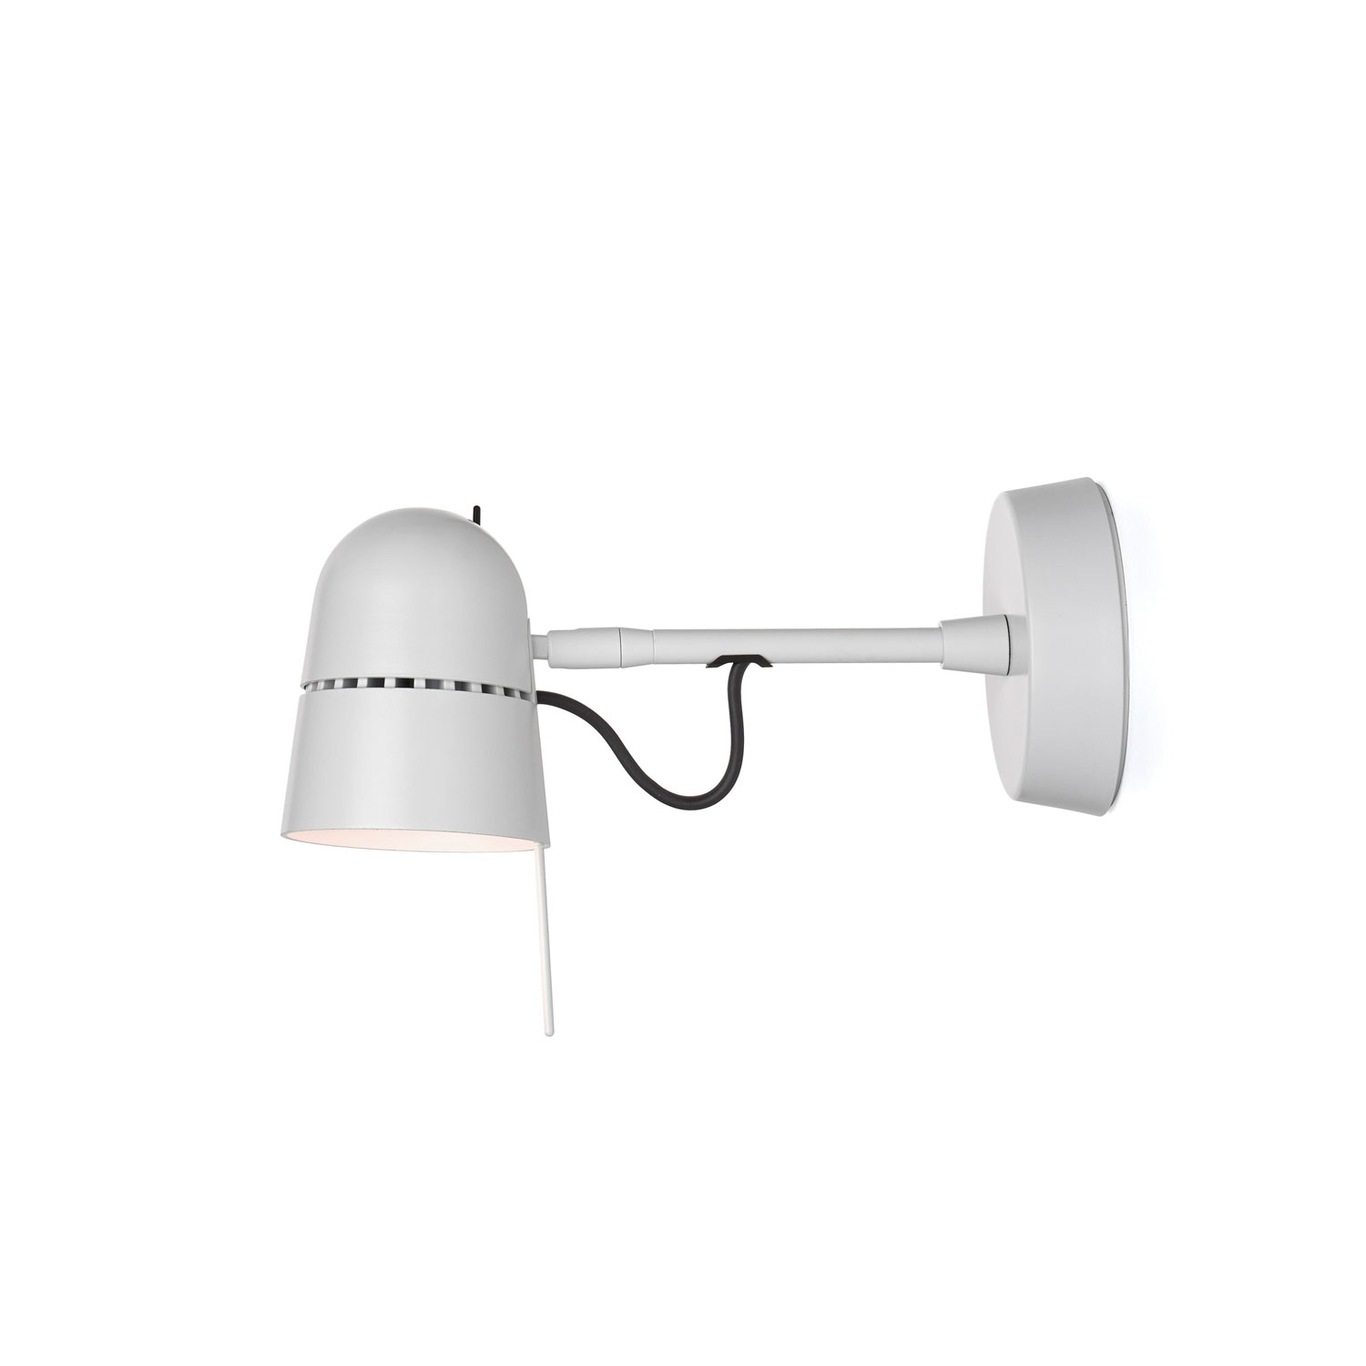 Counterbalance Spot Wall/Ceiling Lamp, White